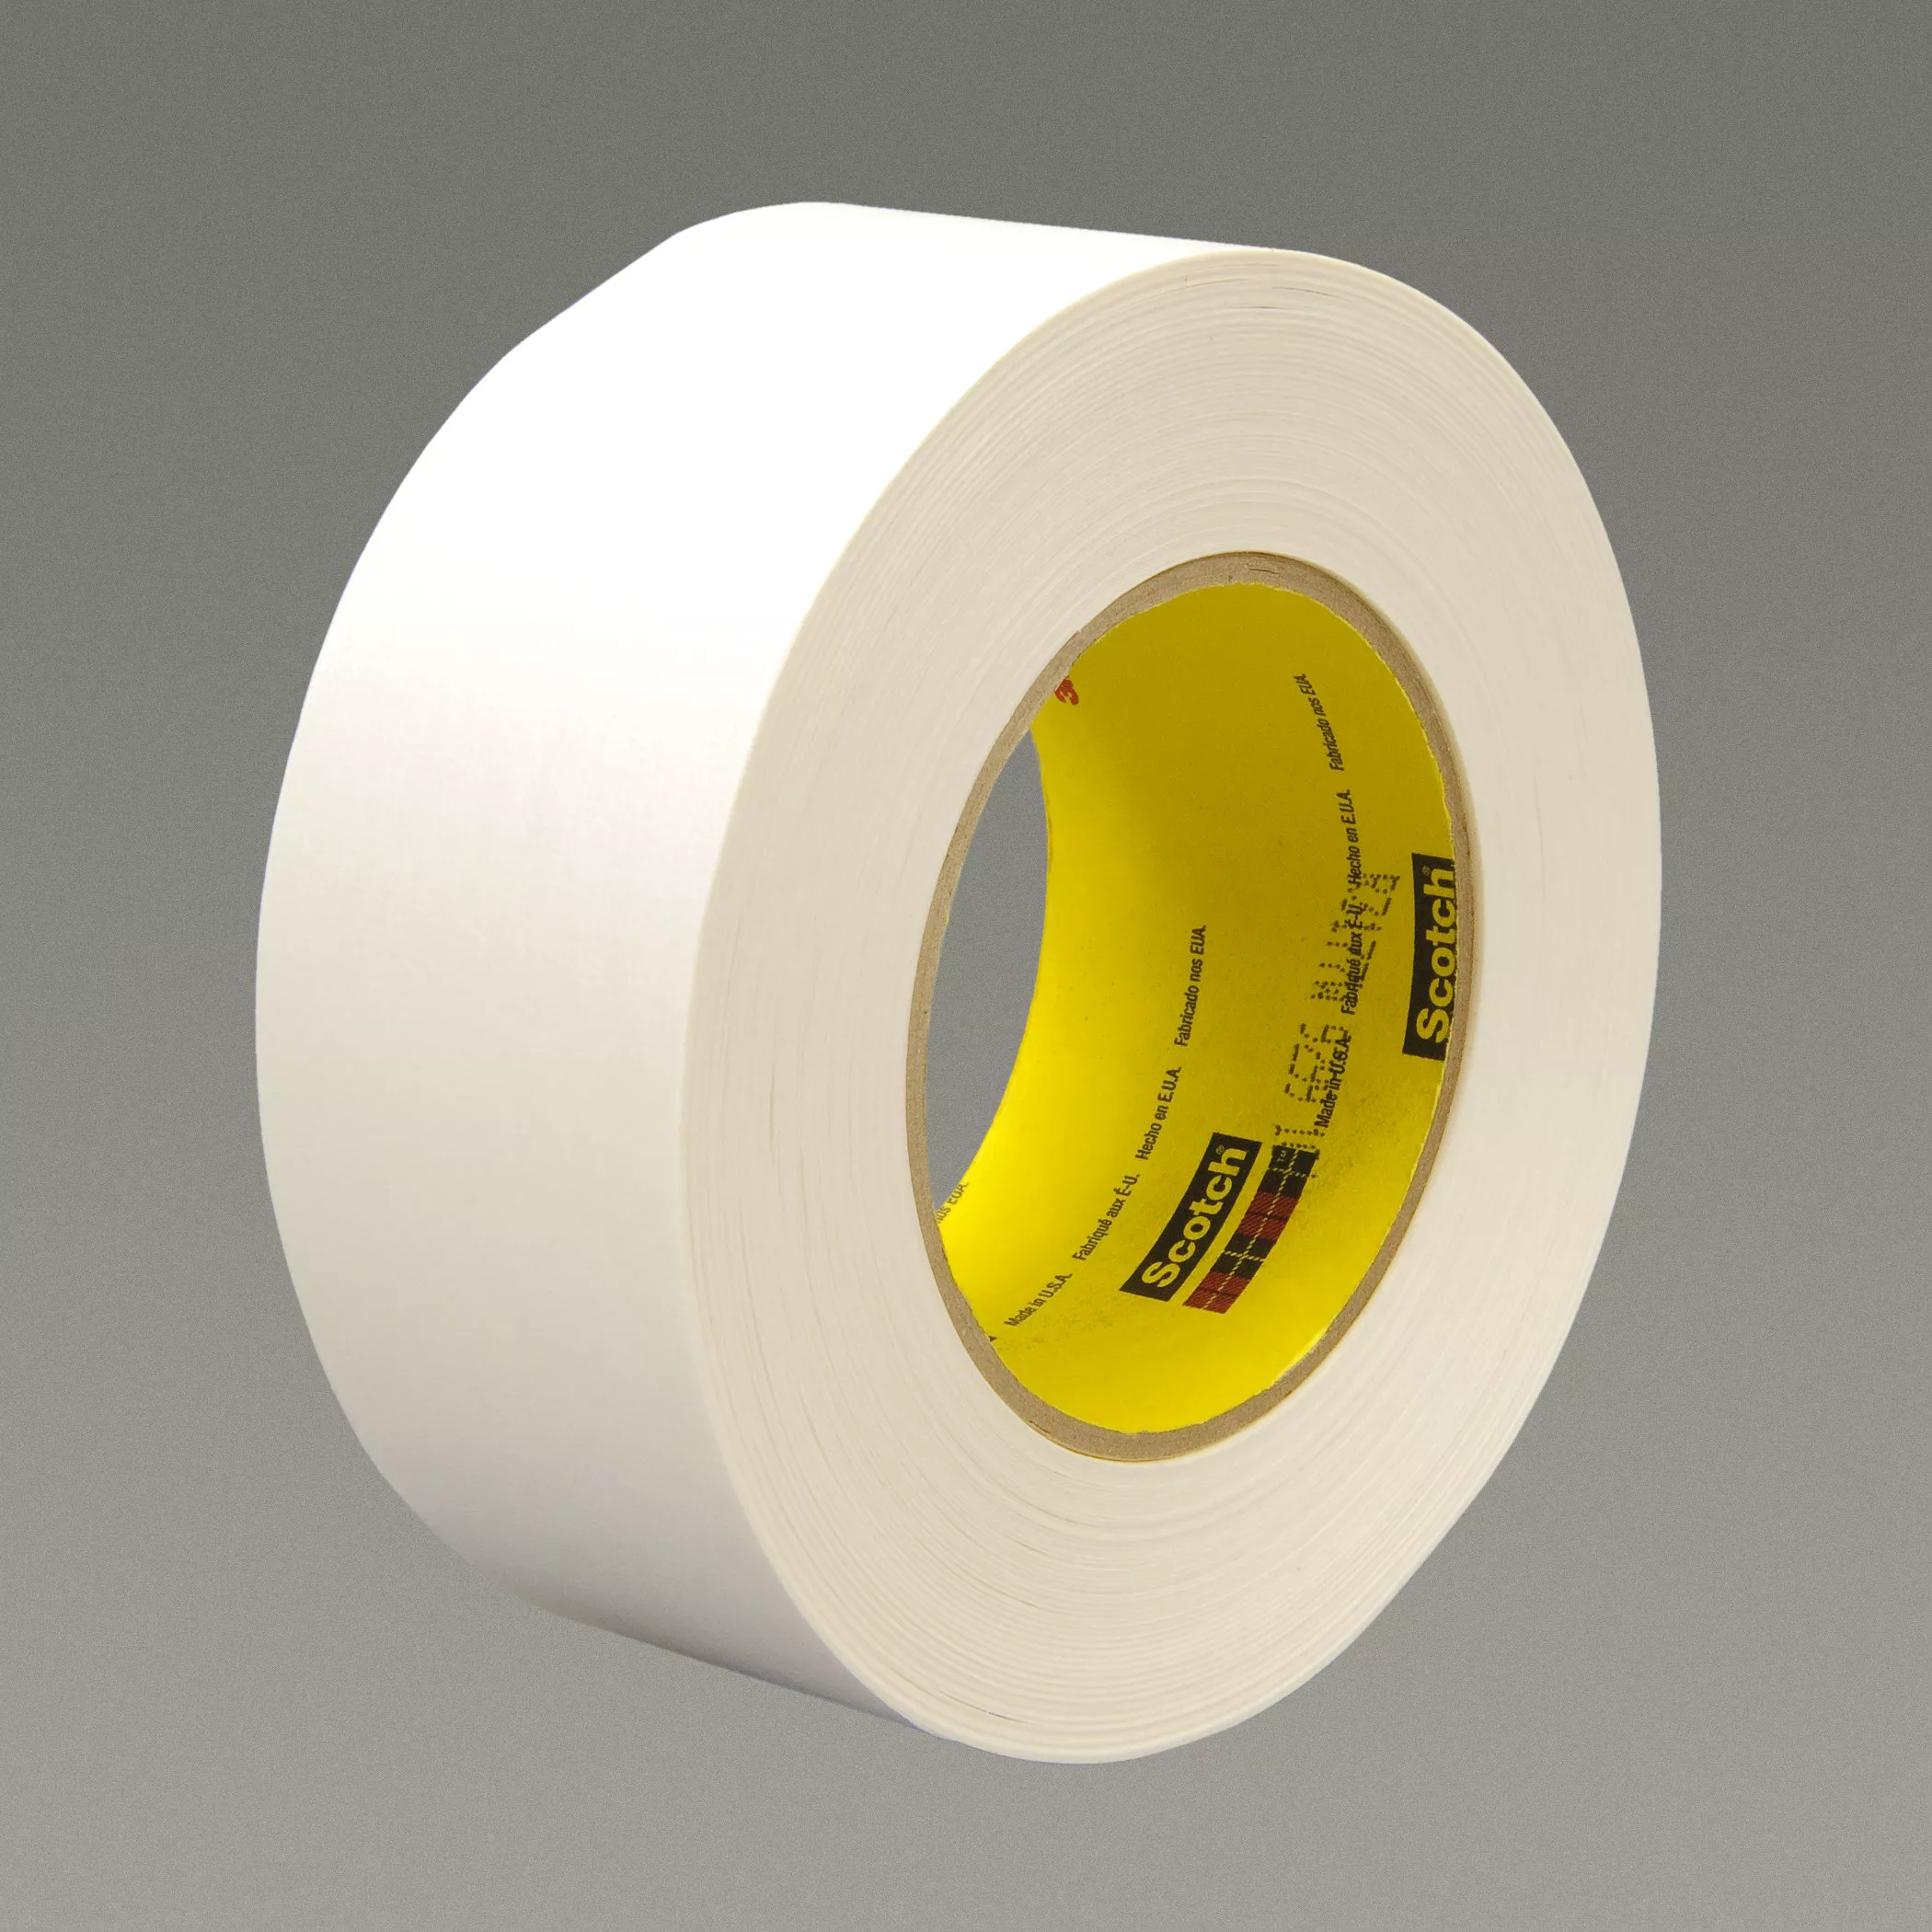 3M™ Repulpable Super Strength Single Coated Tape R3177, White, 48 mm
x
55 m, 7 mil, 24 Roll/Case